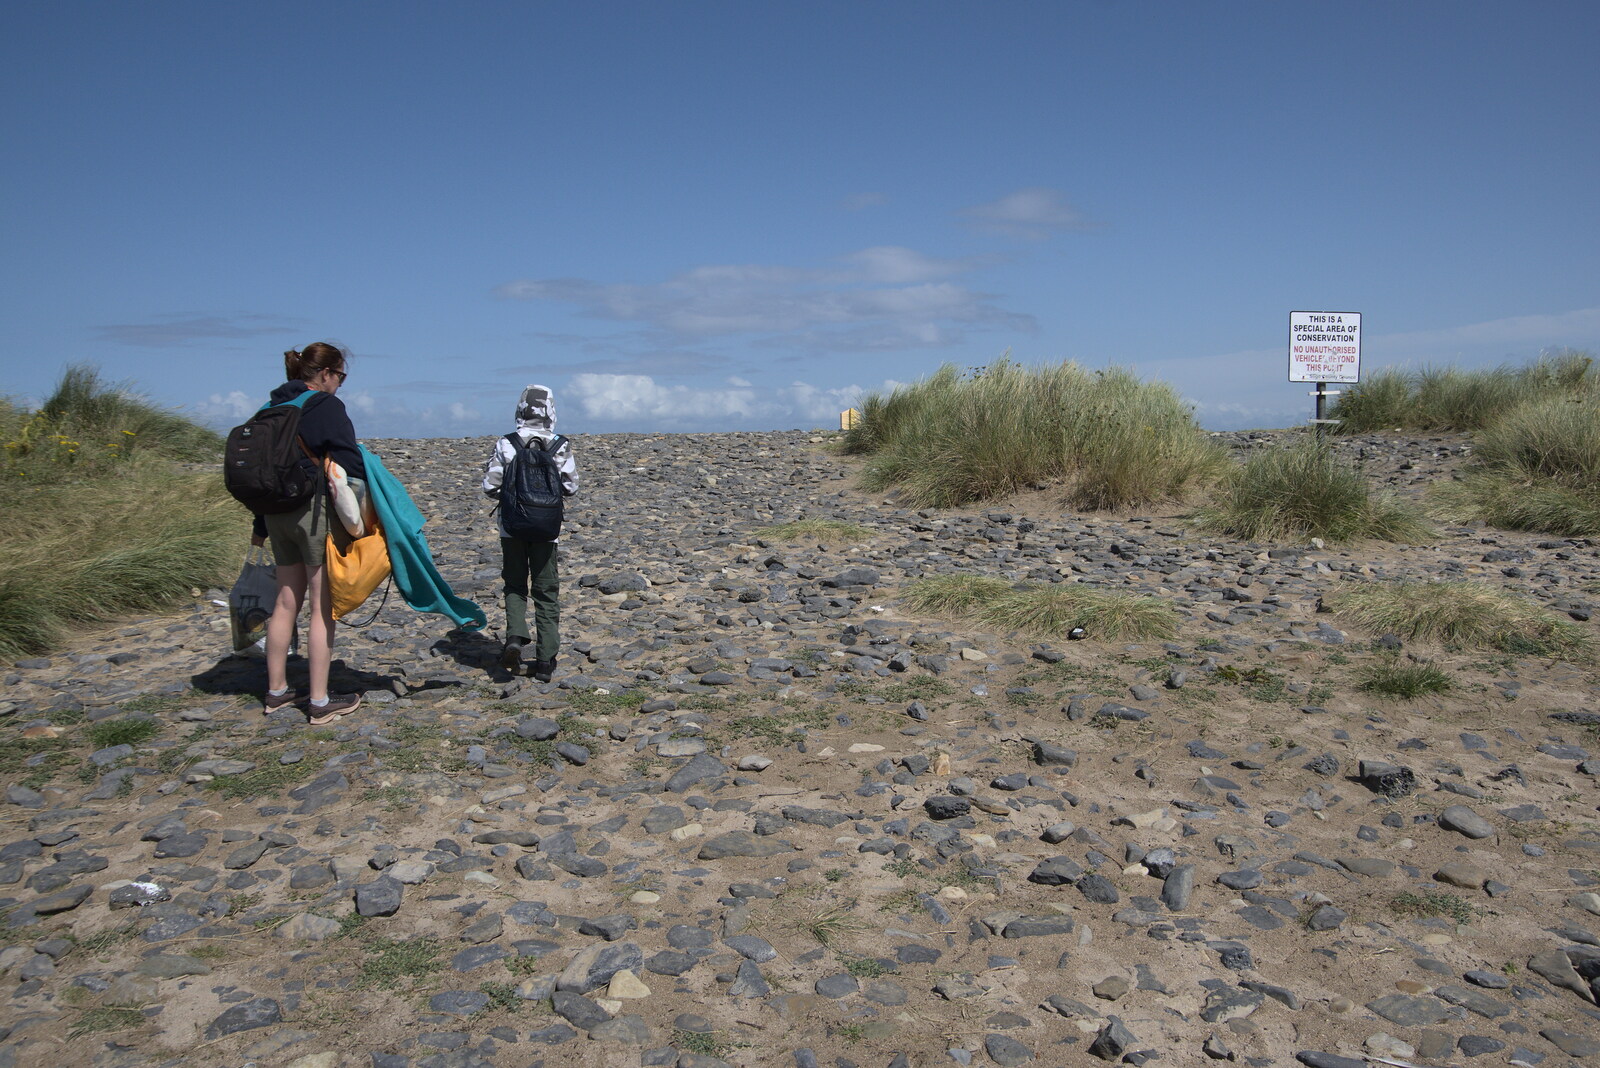 A Trip to Manorhamilton, County Leitrim, Ireland - 11th August 2021: Isobel and Harry back at Streedagh Beach